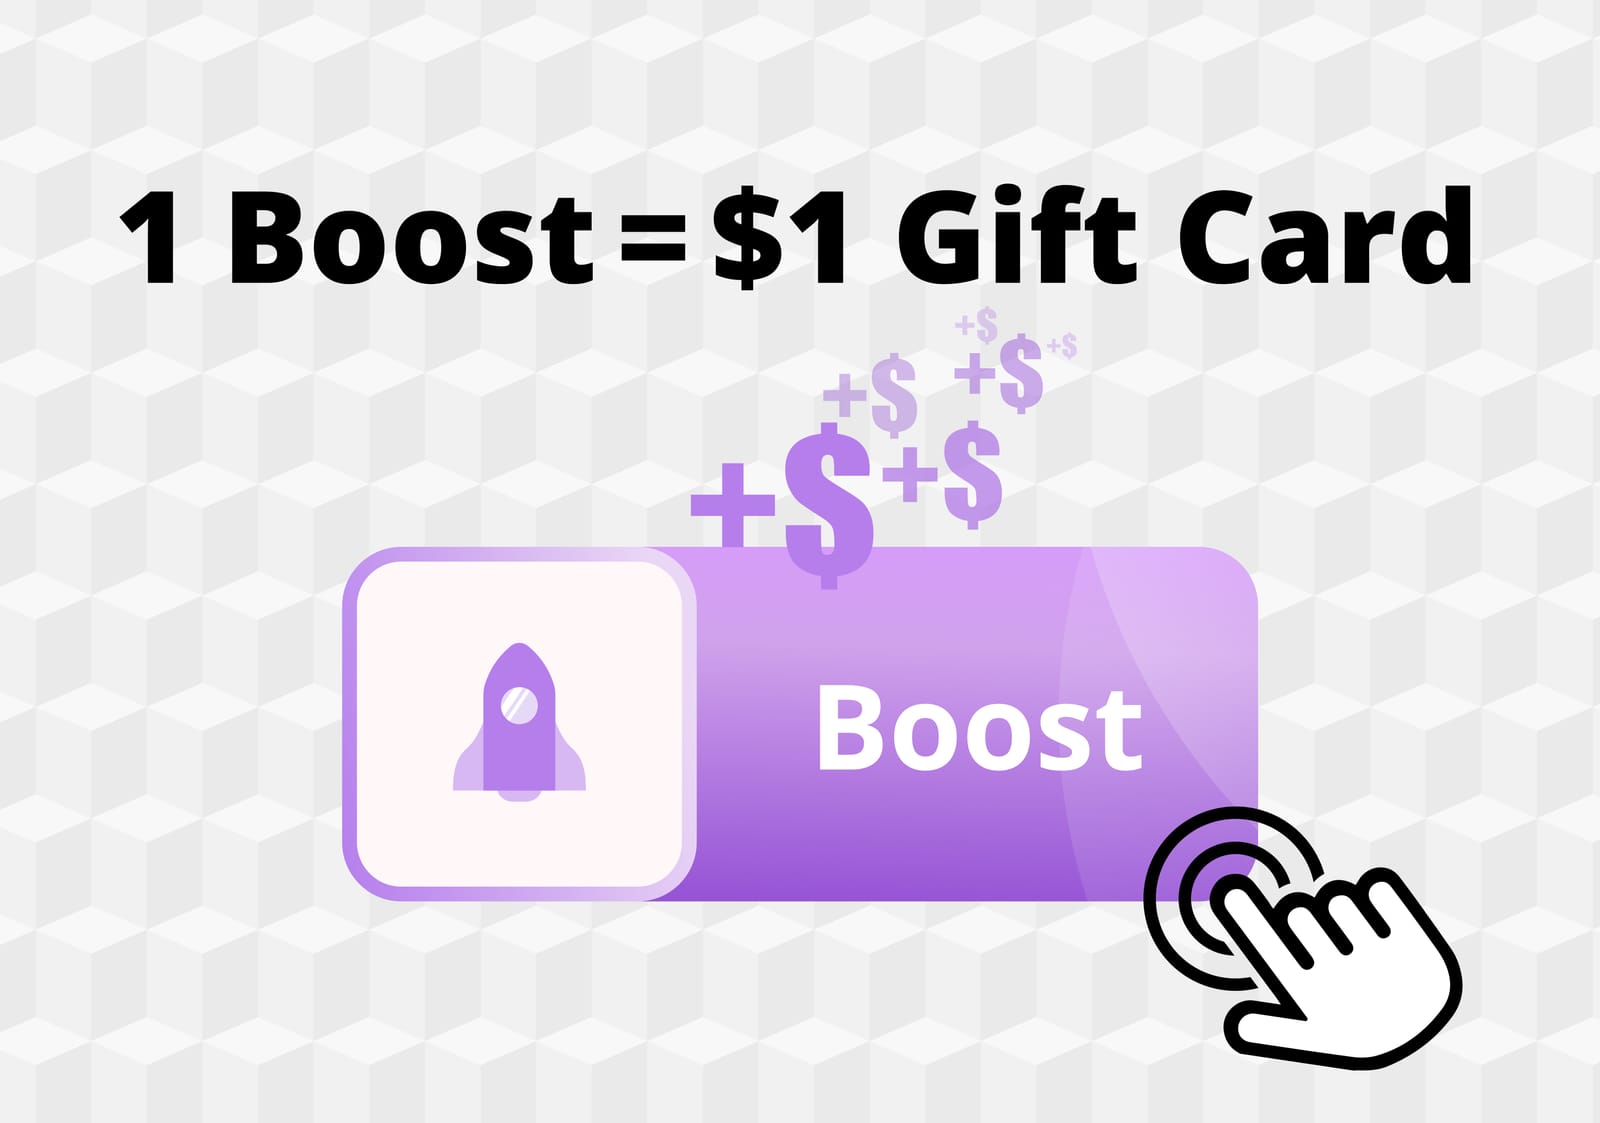 The new "Boost" button with a text saying "1 Boost = $1 Gift Card"